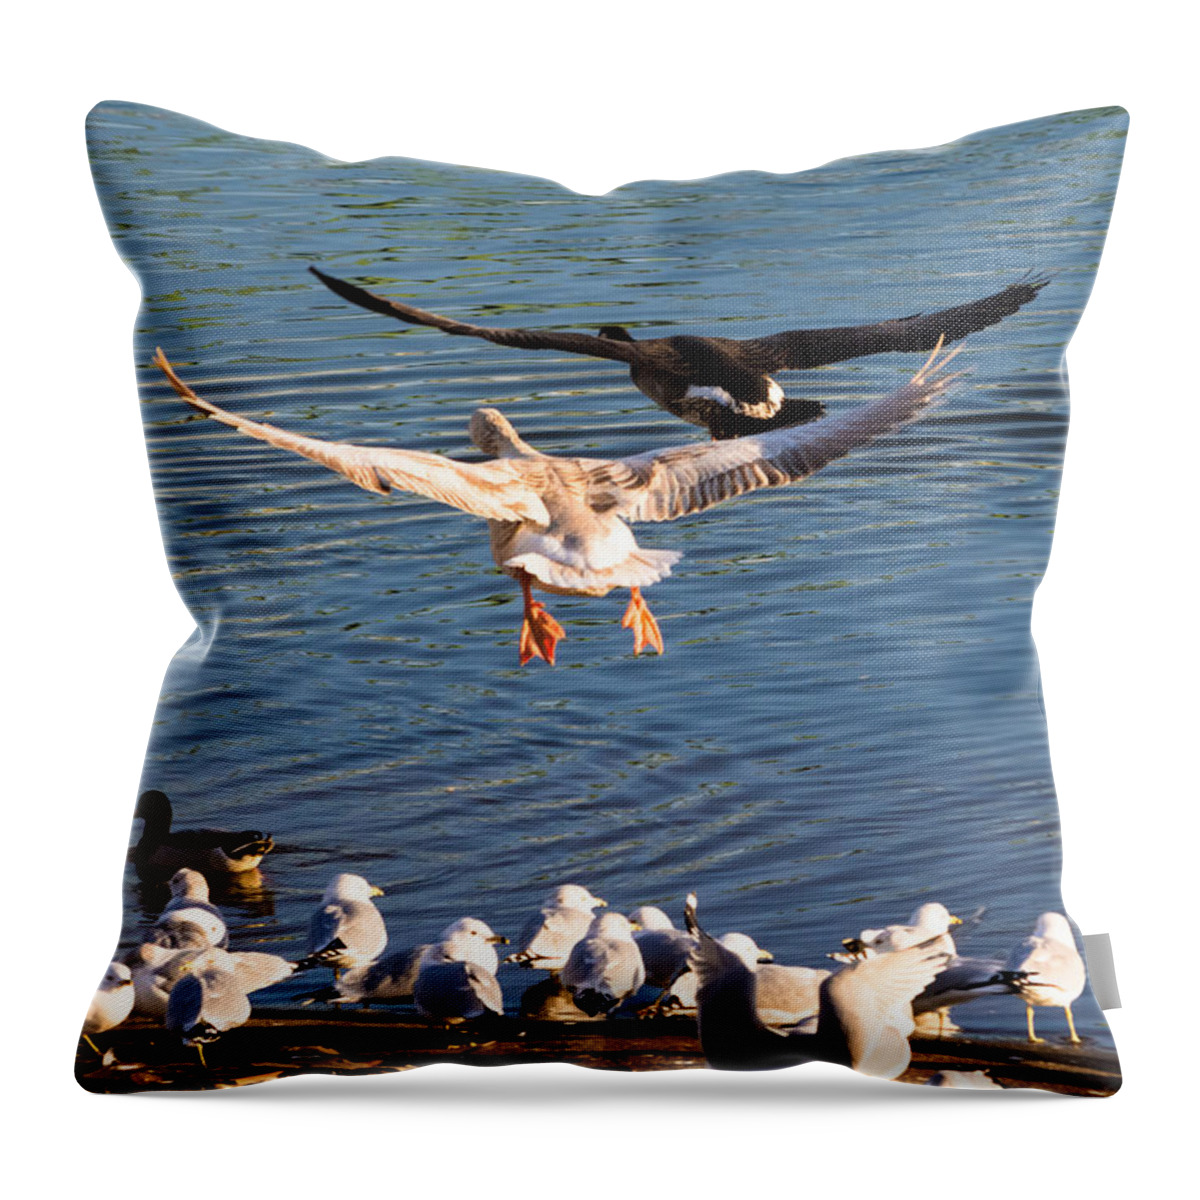 Jan Holden Throw Pillow featuring the photograph We Have Lift Off by Holden The Moment